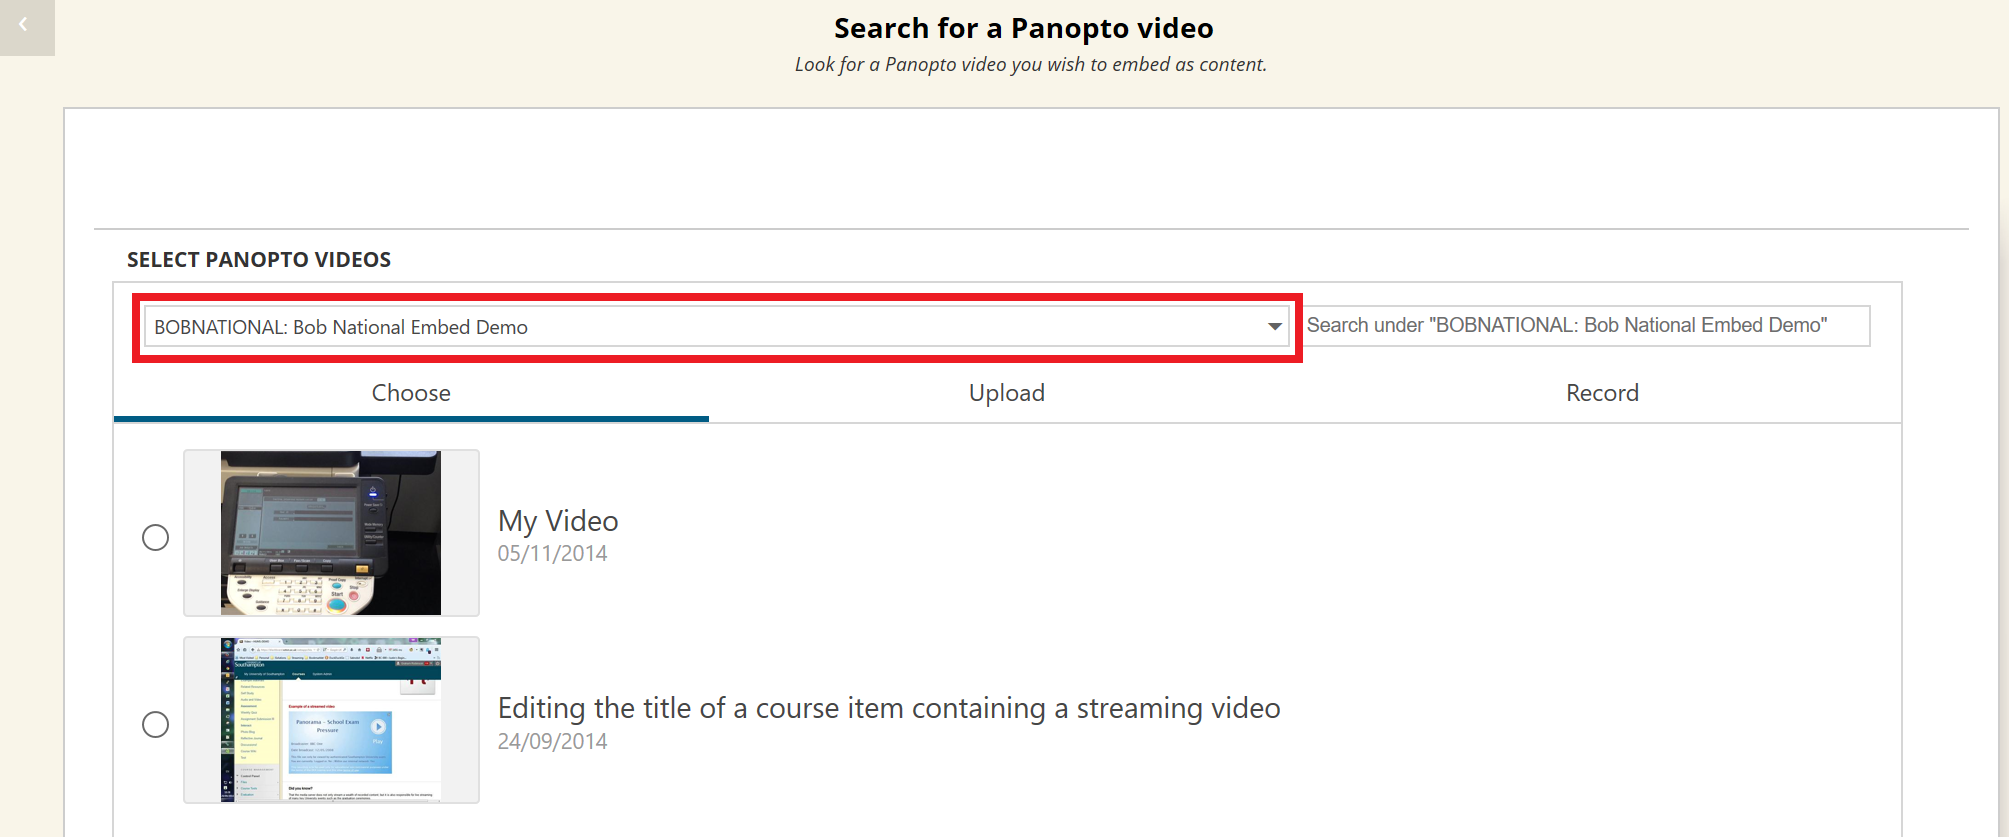 A Panopto video list interface, showing a preview image and title of potential videos that can be added. It is highlighting a folder dropdown list.